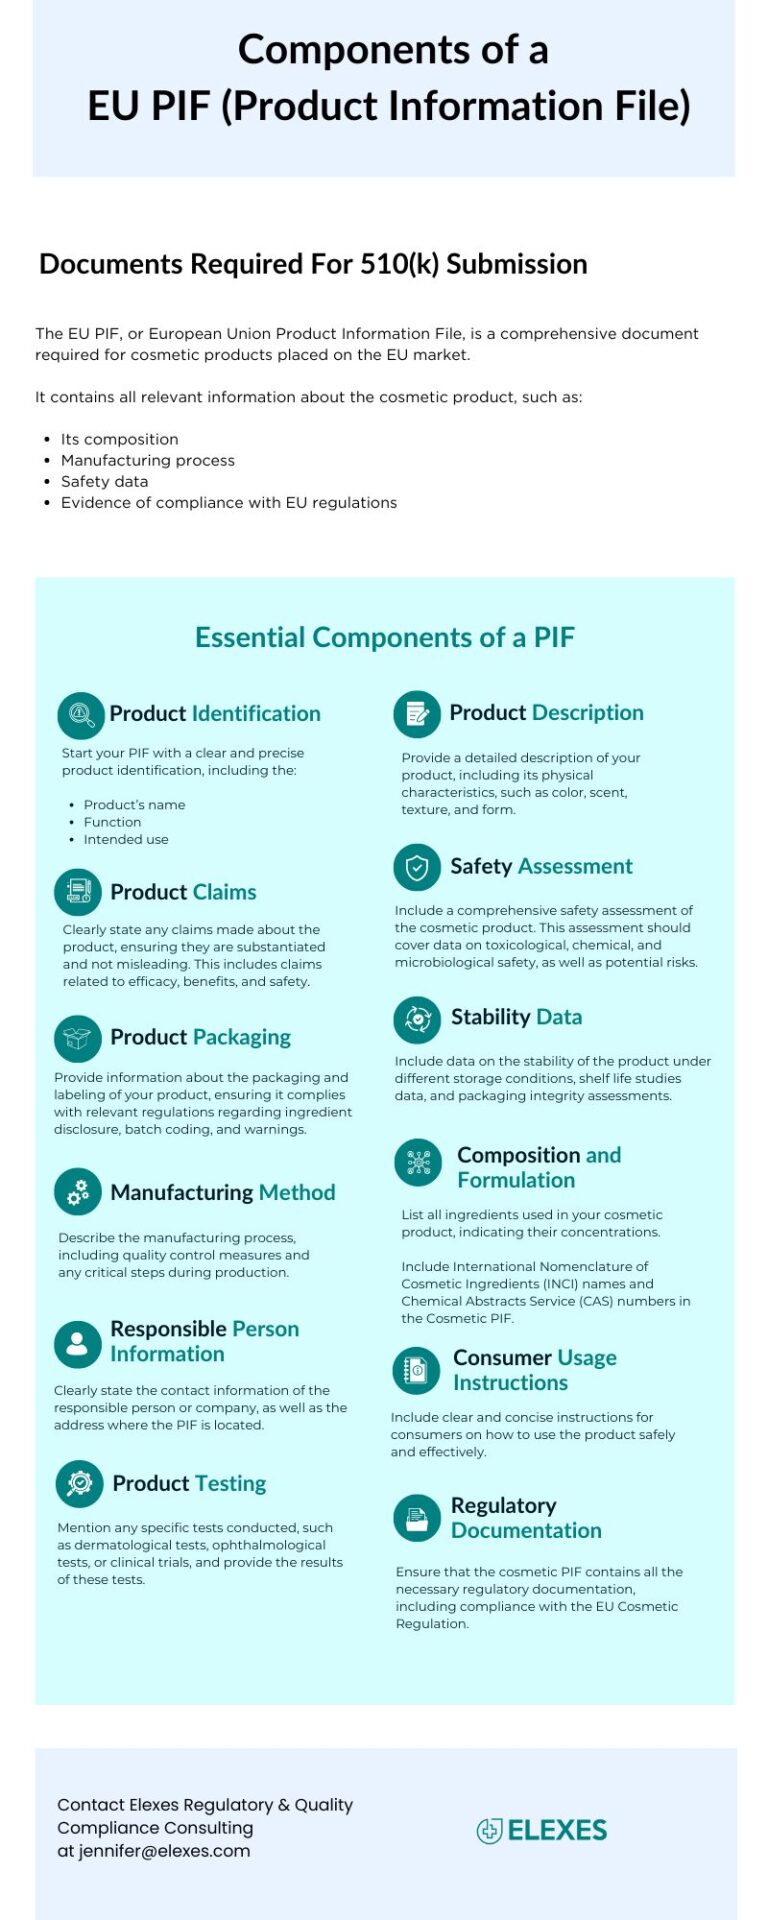 Components of a EU PIF (Product Information File)